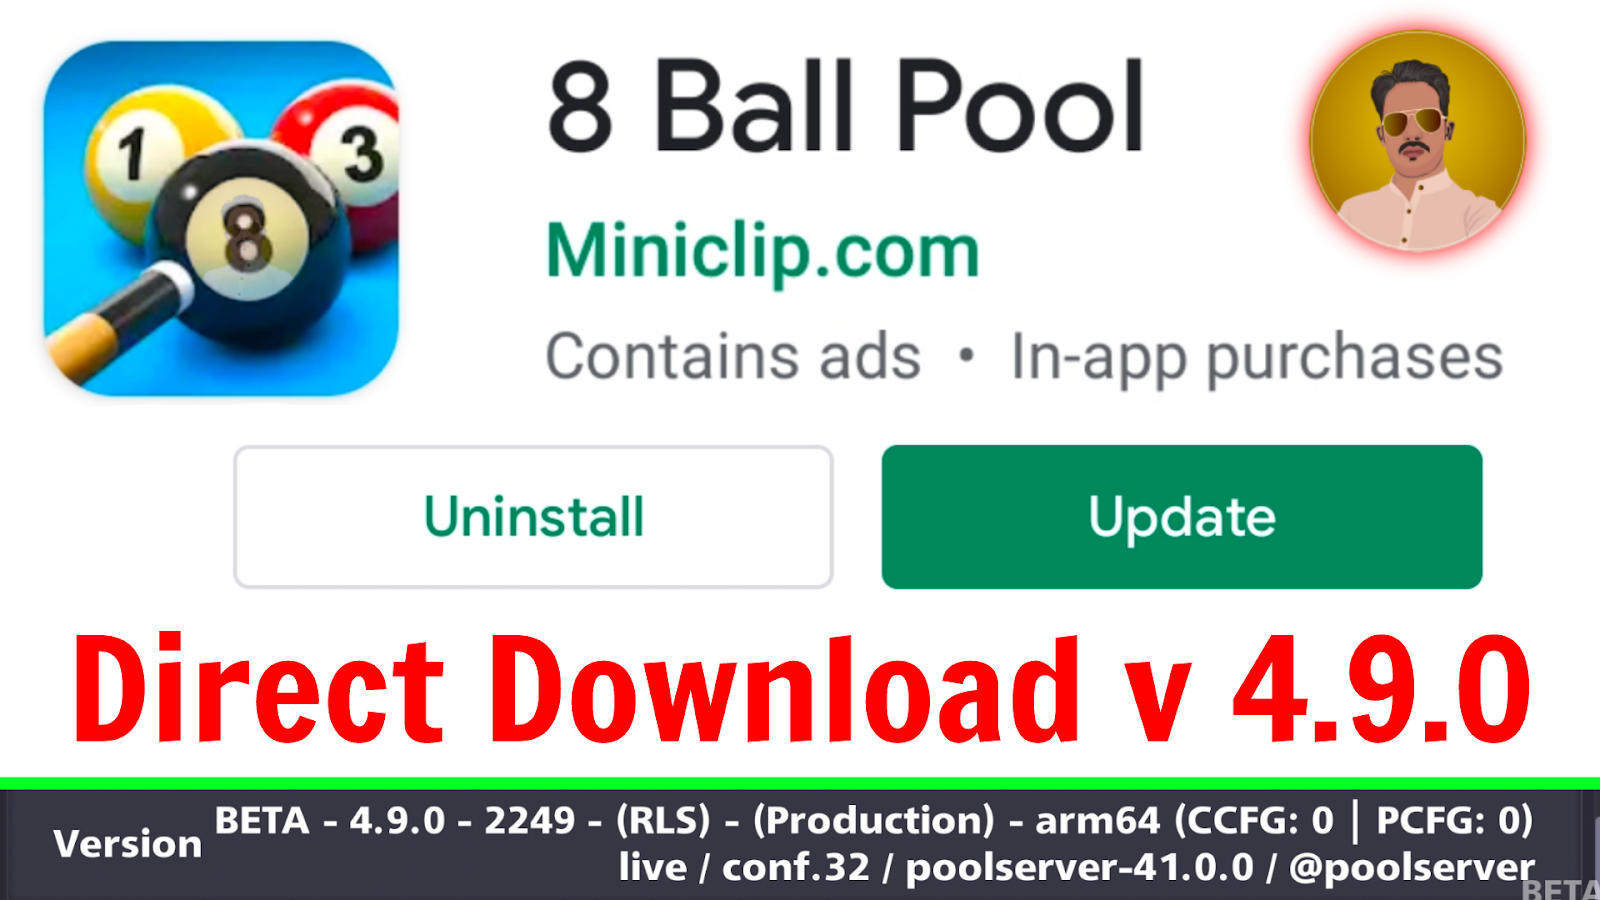 8 Ball New Latest Beta Version 4 9 0 Direct Download Now By Sabir Fareed